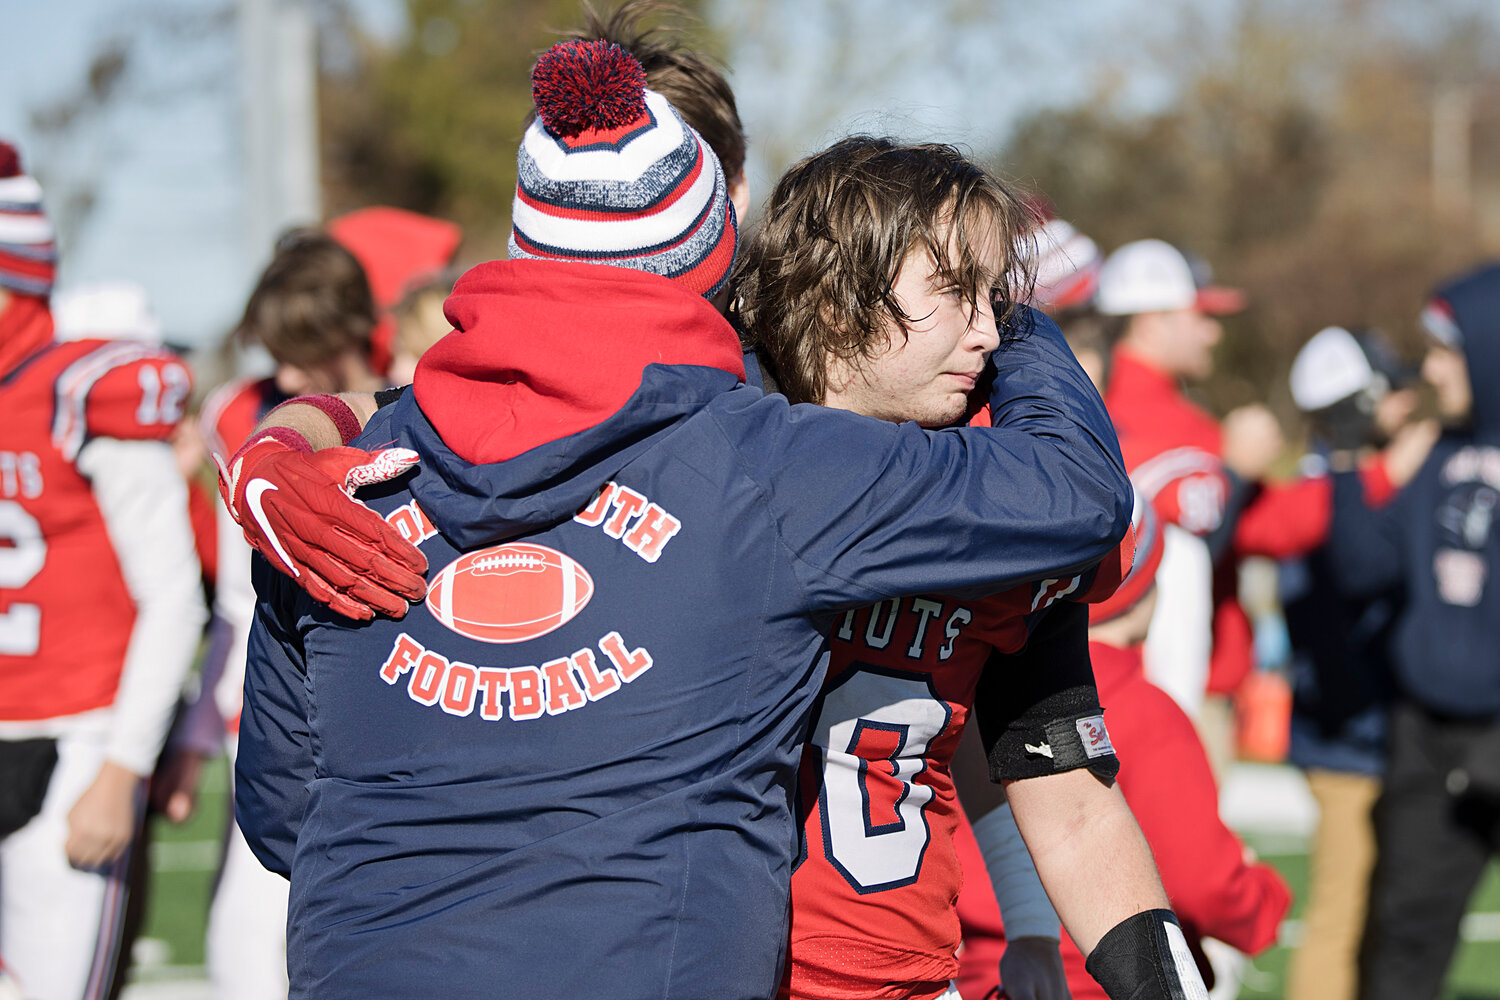 Senior Chase Fanning shares a hug with a coach after his final high school game.